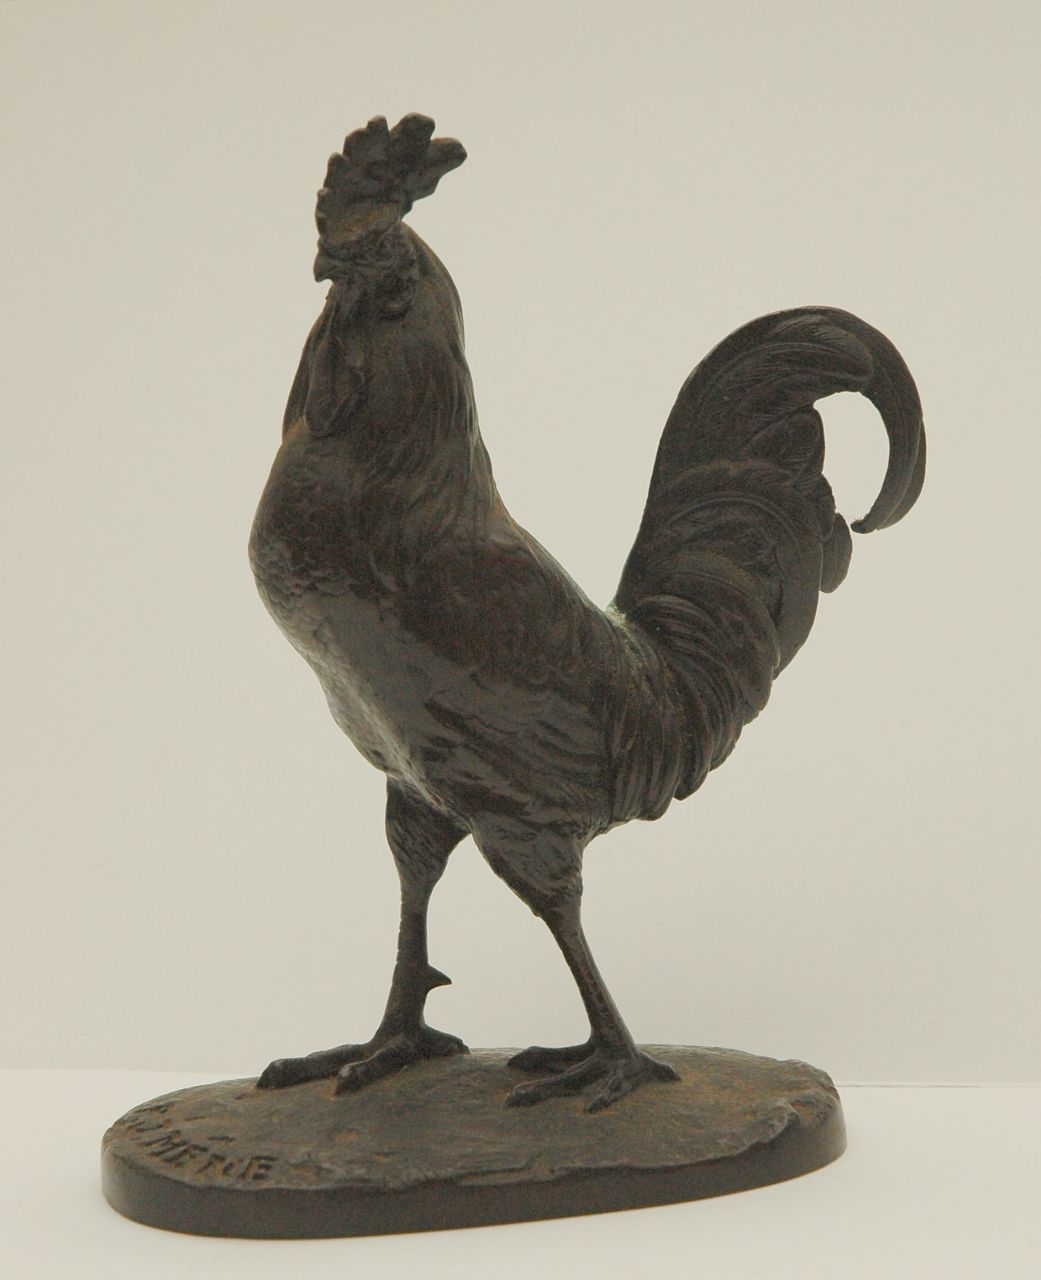 Mène P.J.  | Pierre Jules Mène, A standing rooster, bronze 14.6 x 10.3 cm, signed with stamp on base